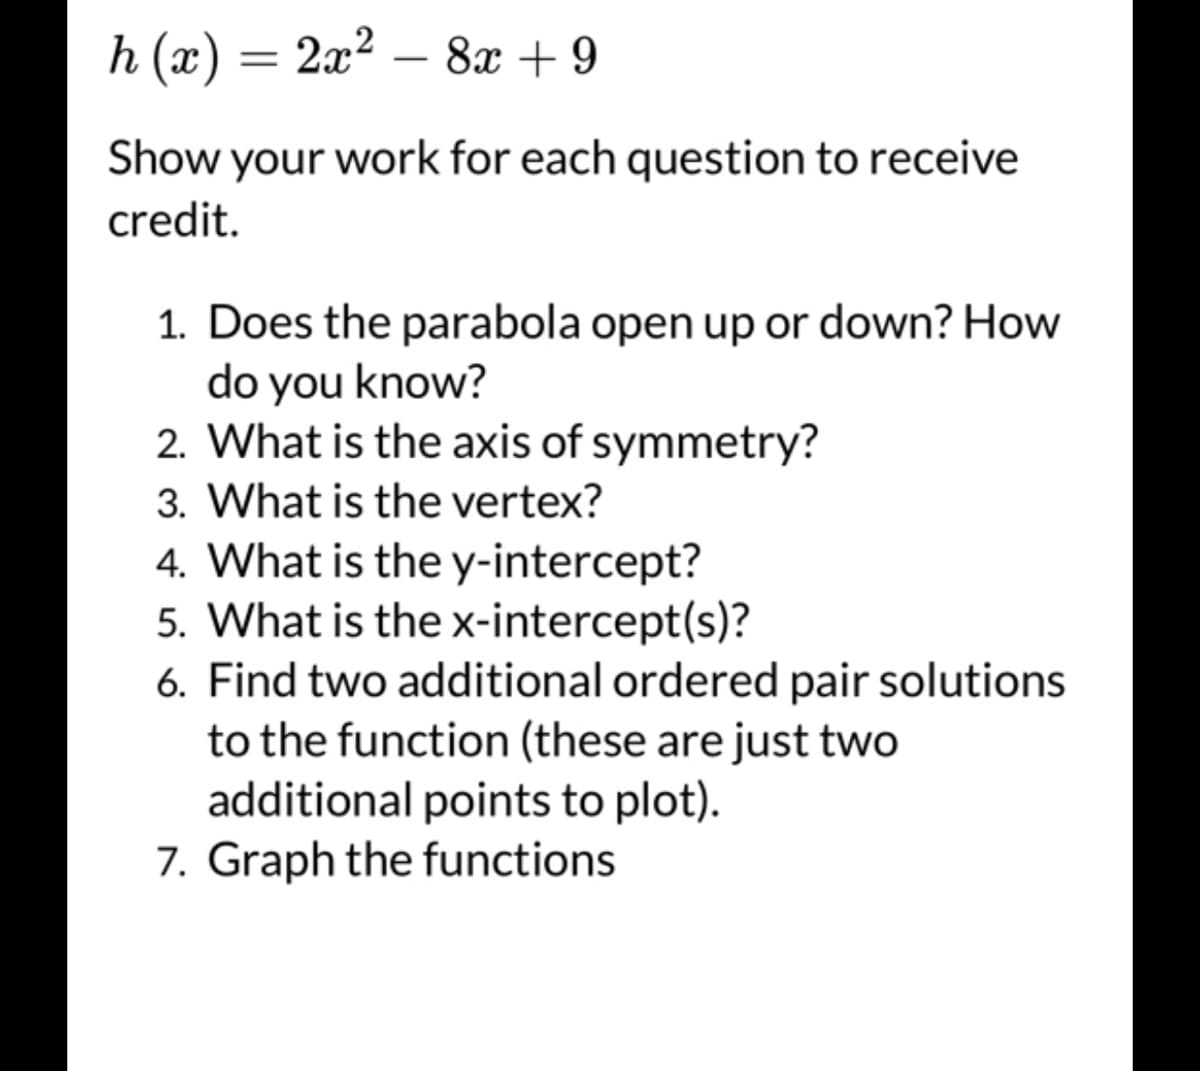 h (x) = 2x² − 8x +9
Show your work for each question to receive
credit.
1. Does the parabola open up or down? How
do you know?
2. What is the axis of symmetry?
3. What is the vertex?
4. What is the y-intercept?
5. What is the x-intercept(s)?
6. Find two additional ordered pair solutions
to the function (these are just two
additional points to plot).
7. Graph the functions